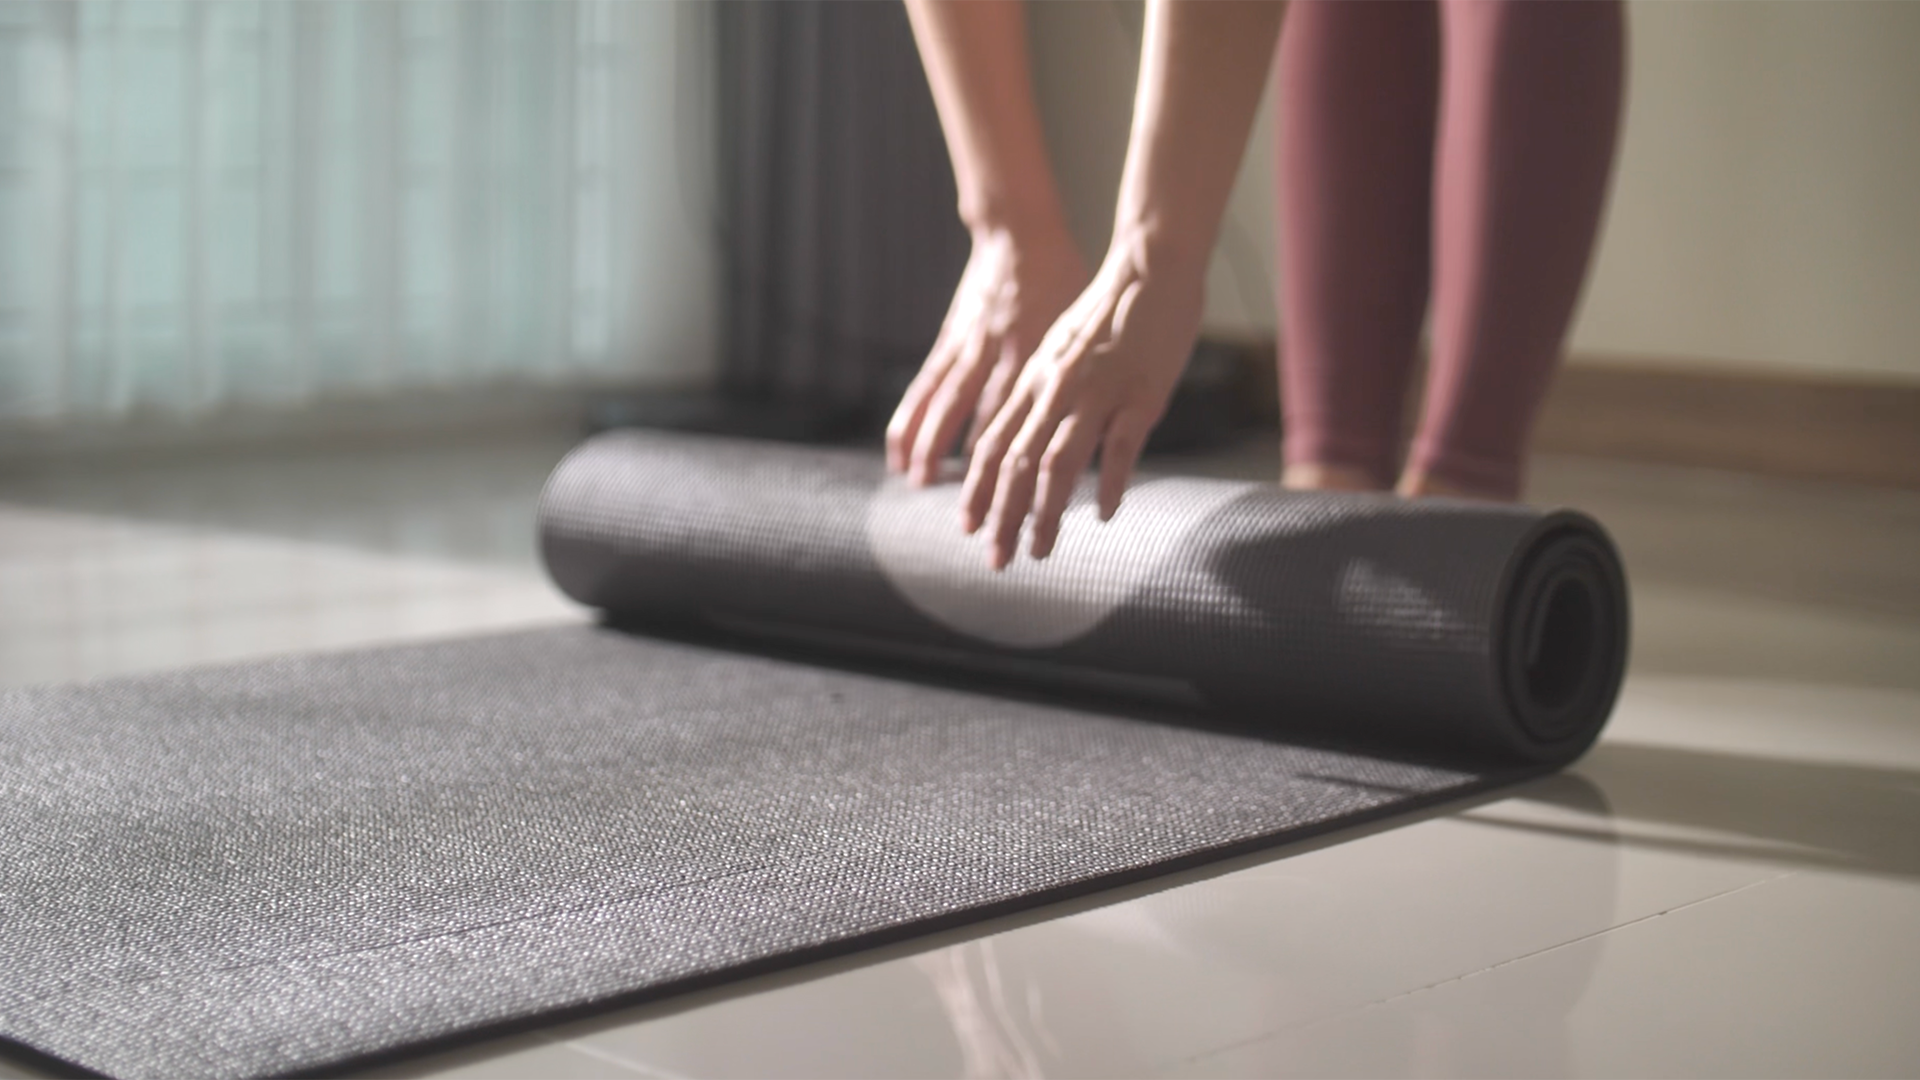 Student Rolling out a yoga mat, getting ready for class.